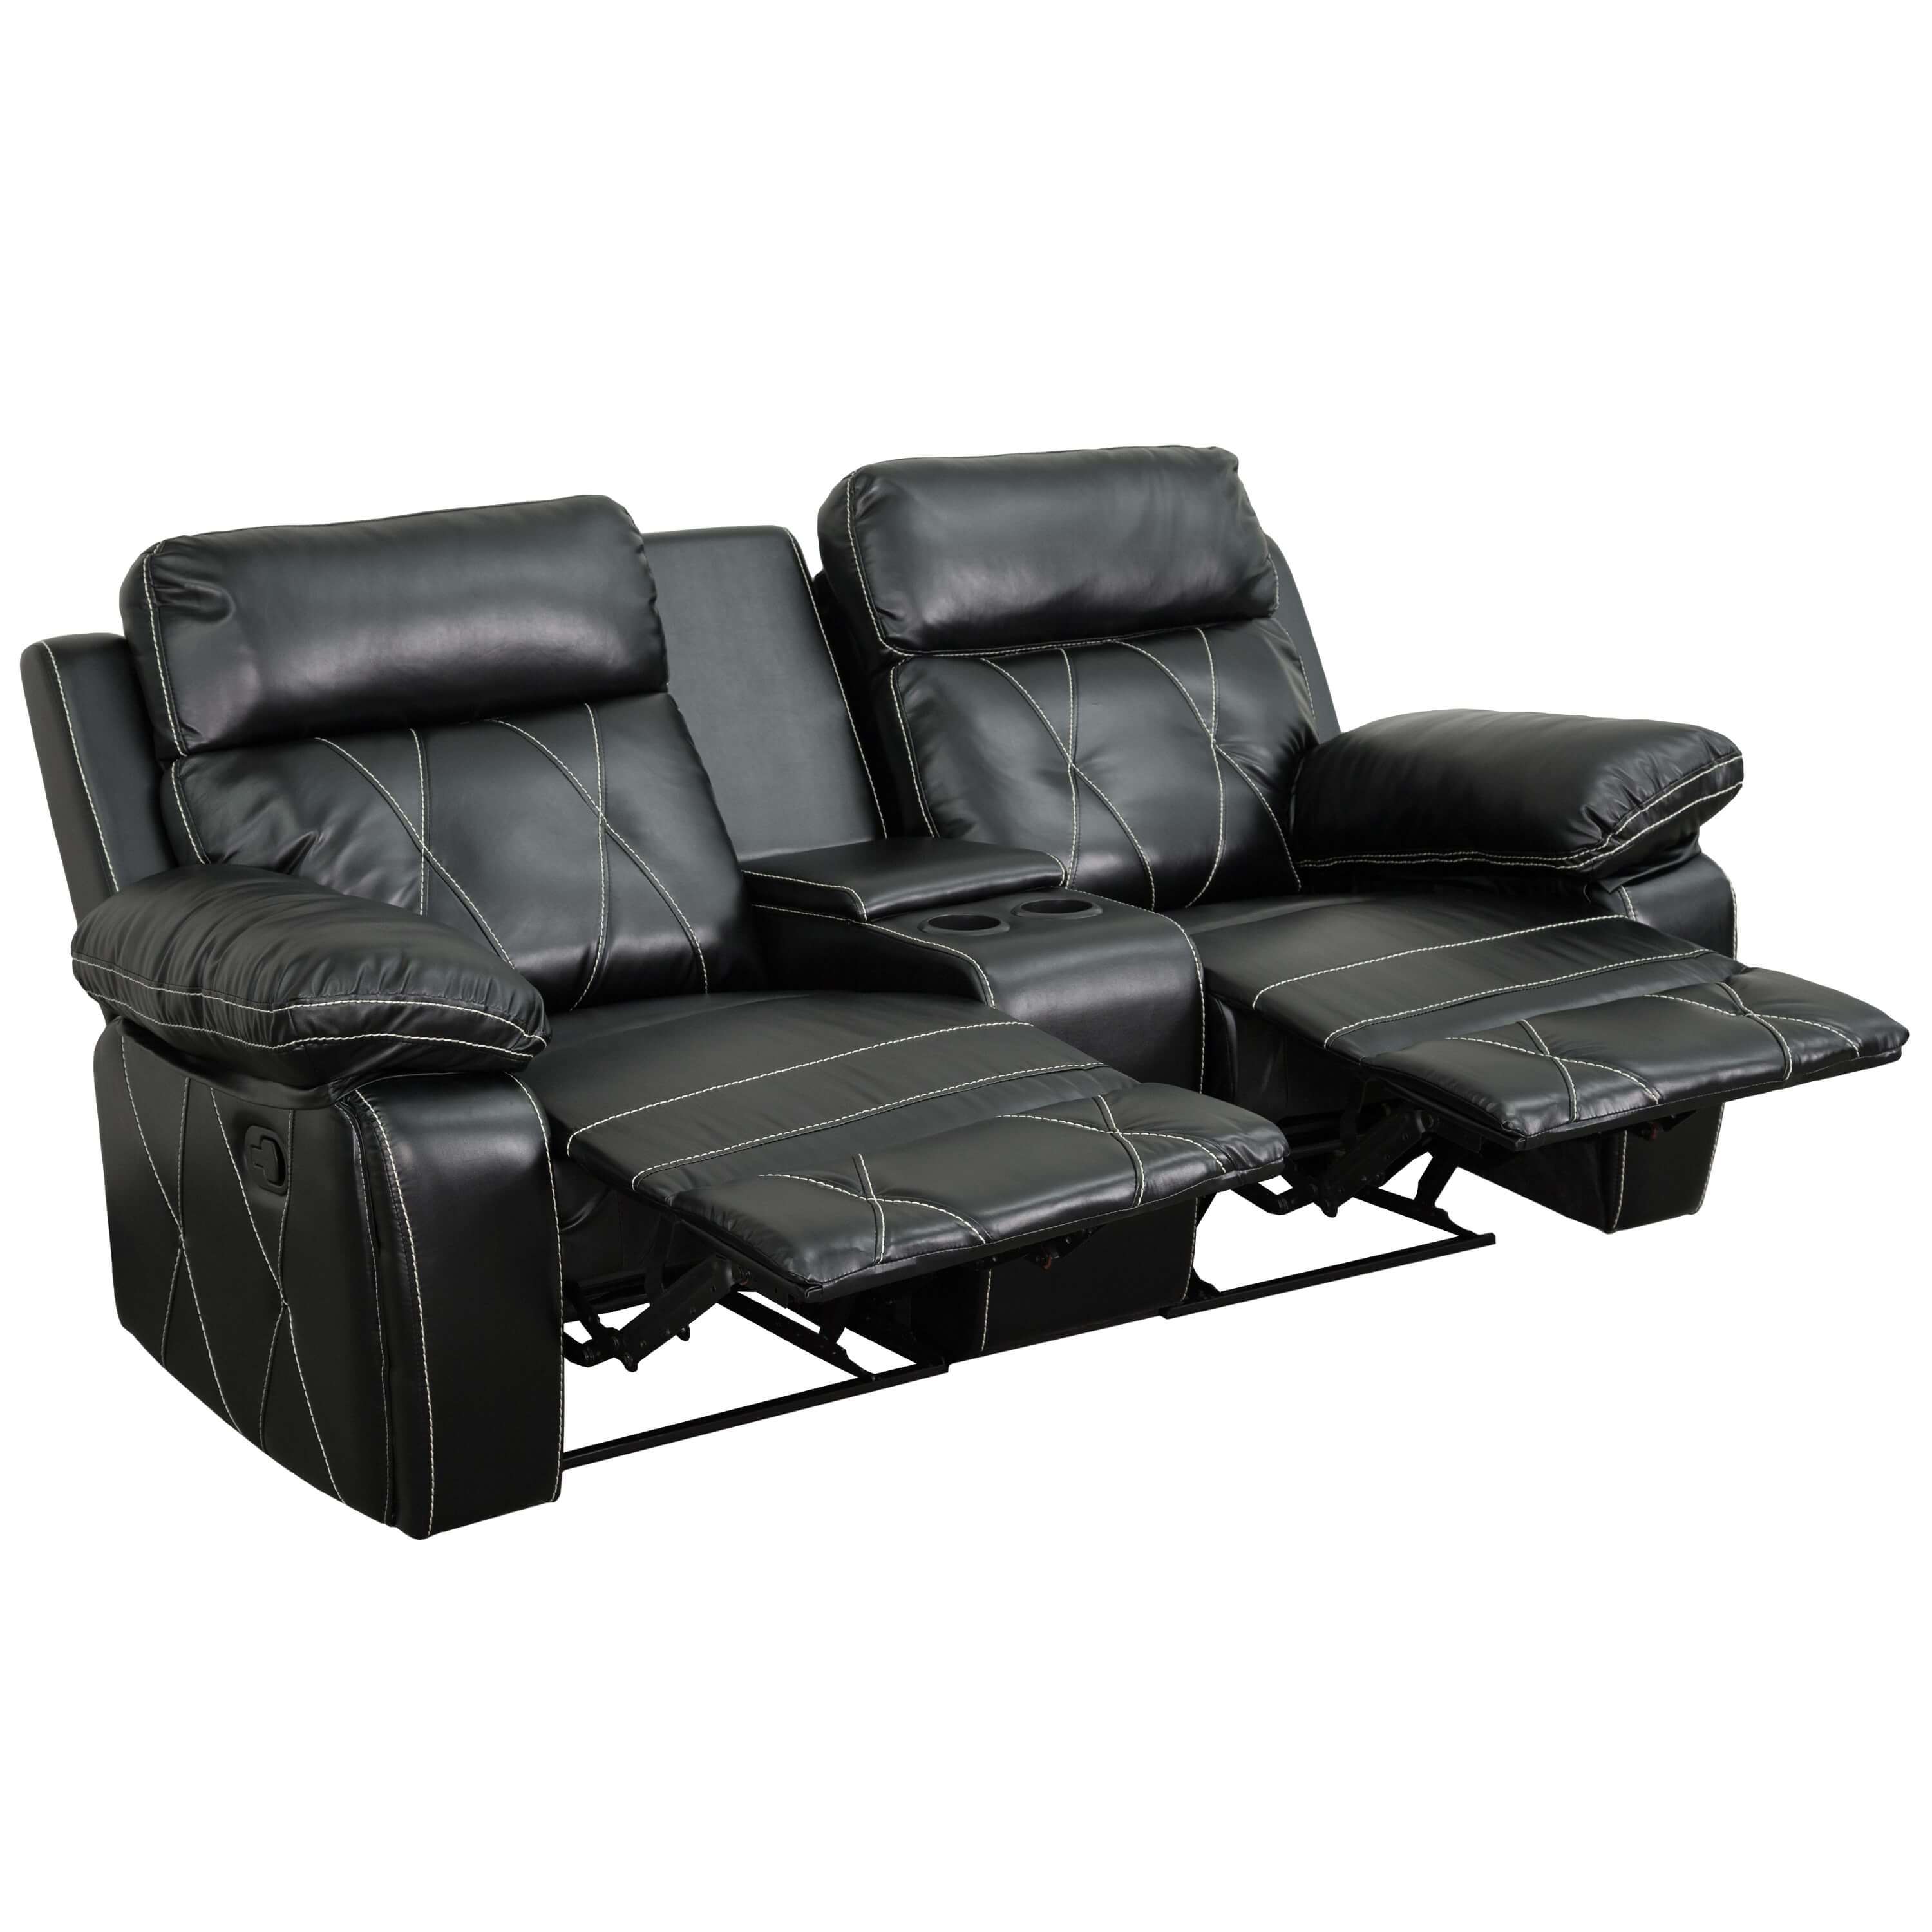 Cinema chairs reclined view